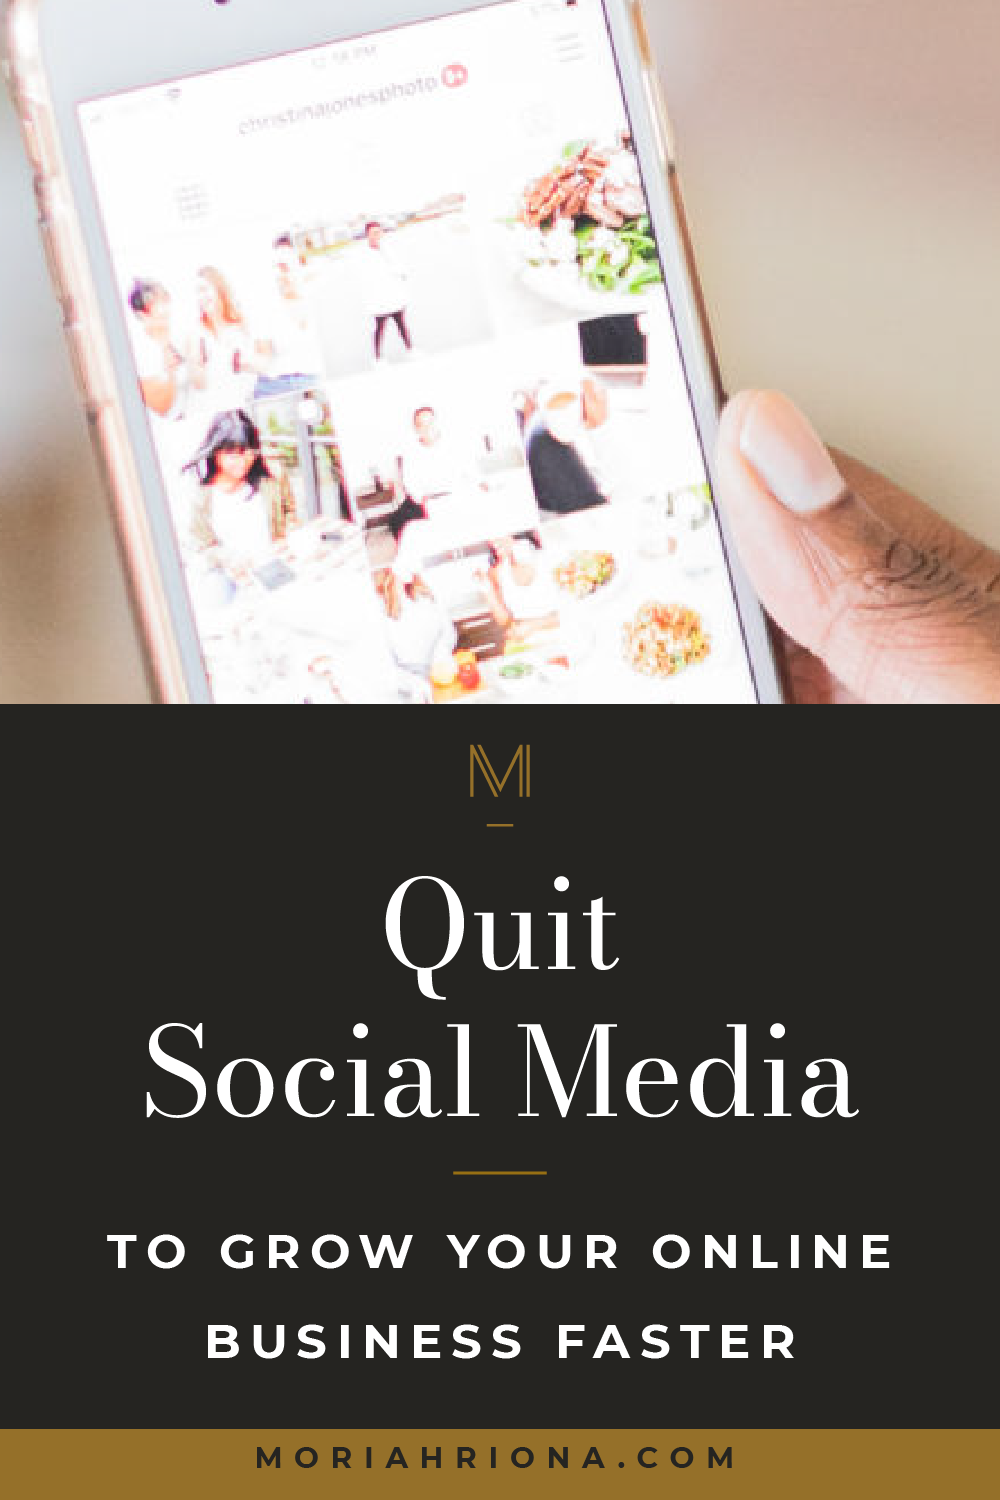 Do you wish you could quit social media once and for all, but you’re worried about how to grow your online business? Then this blog post is for you! I’m sharing a peek at my life after quitting social media and my EXACT strategy for growing my business without it—so you can finally give up social media, too. #luxurybrand #lifecoach #lifecoaching #marketingtips